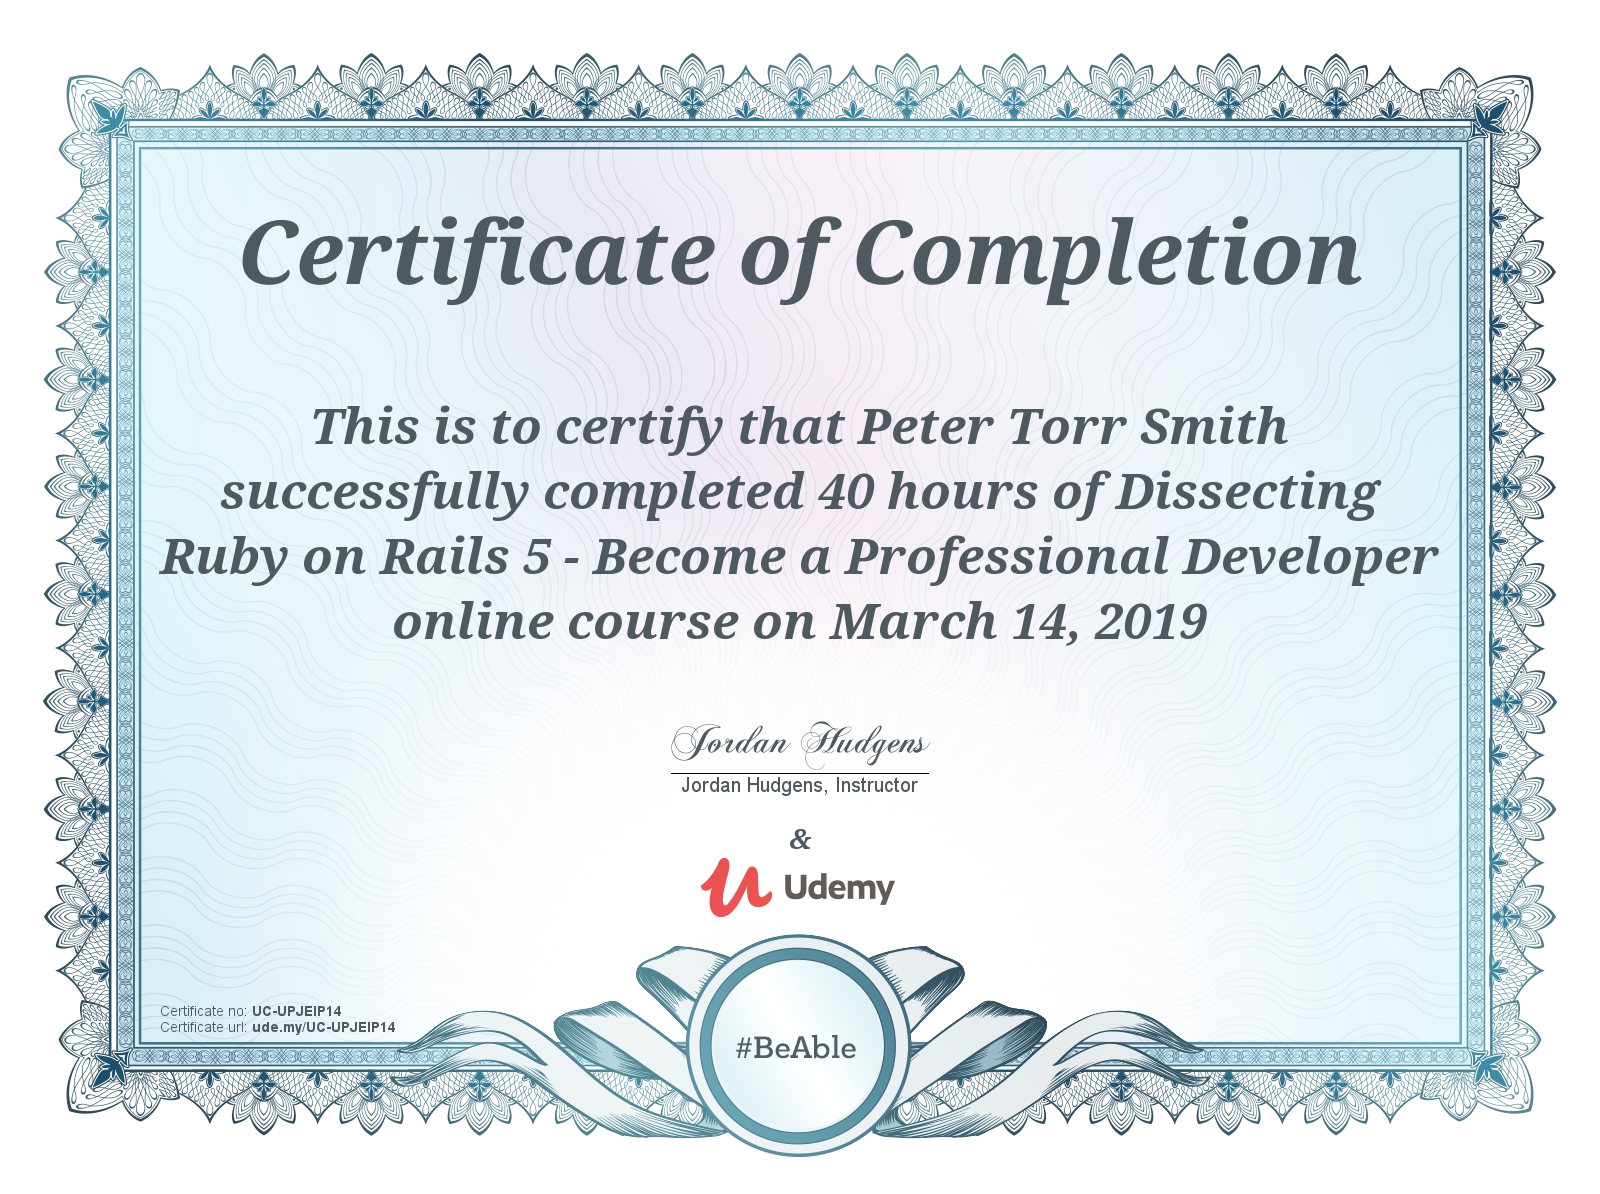 Certificate for Completing Udemy Dissecting Rails 5 Professional course